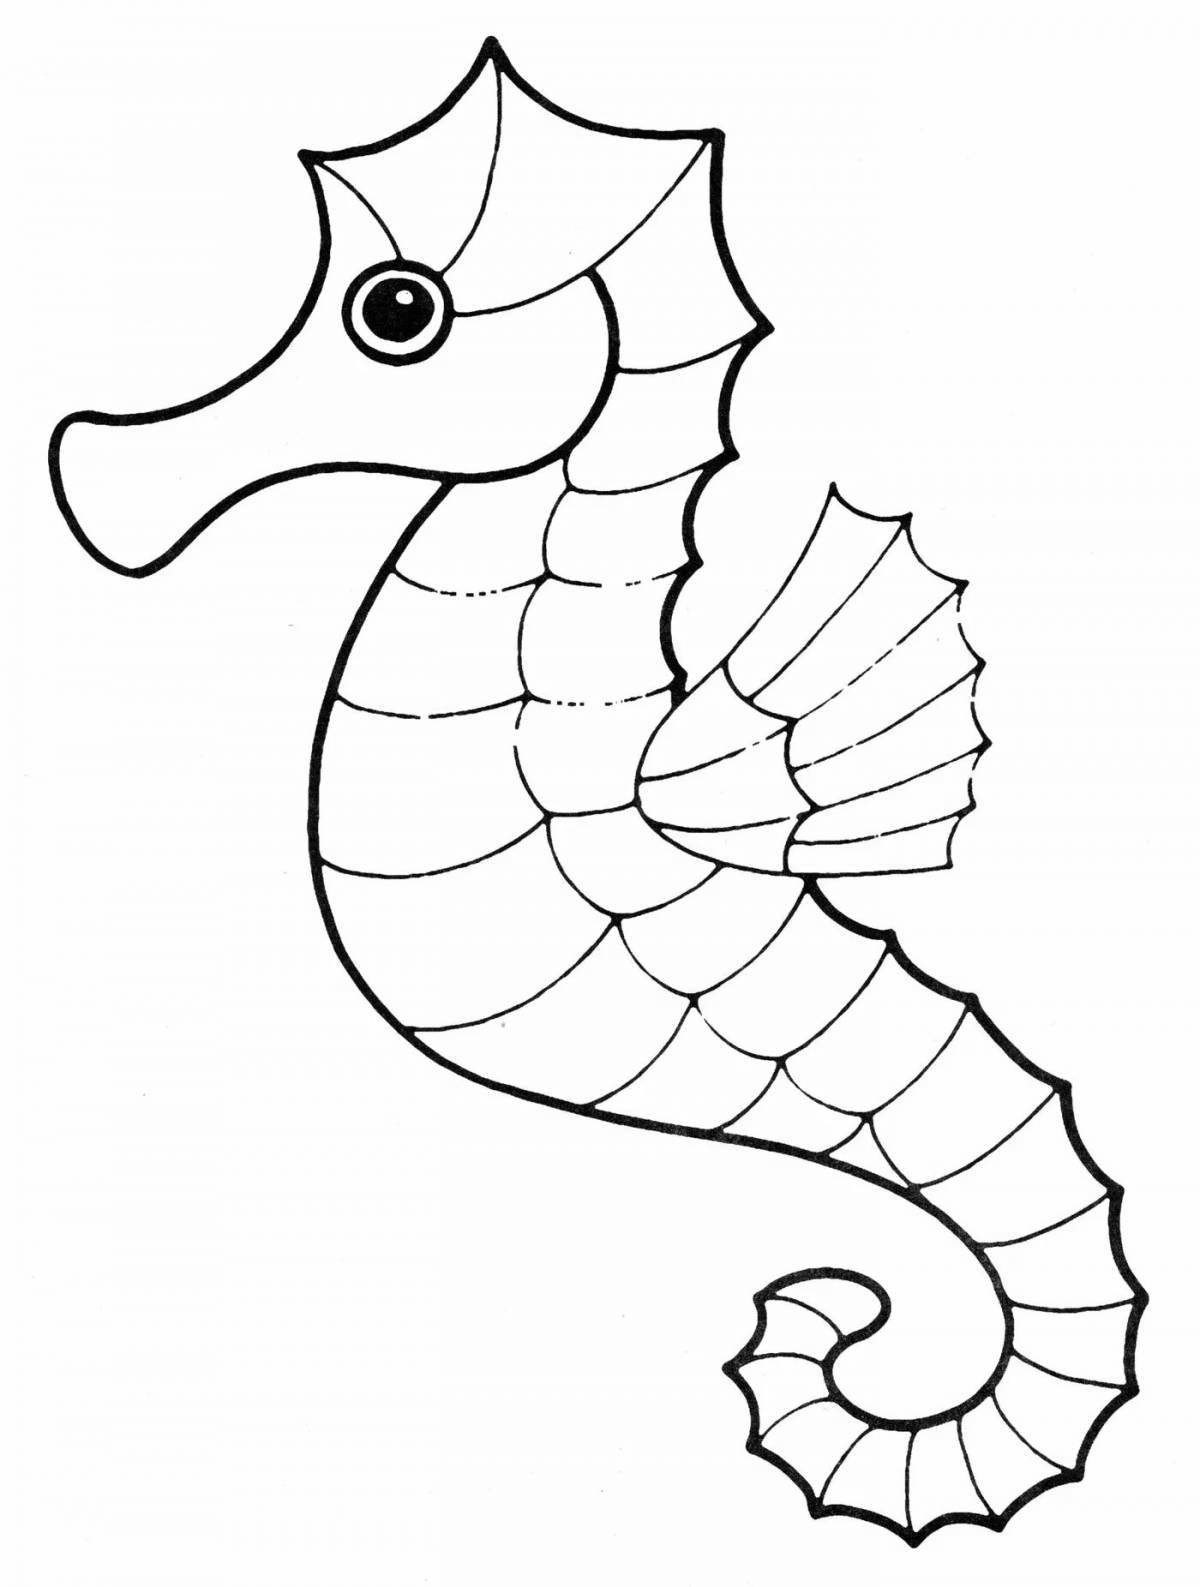 Great seahorse coloring page for kids